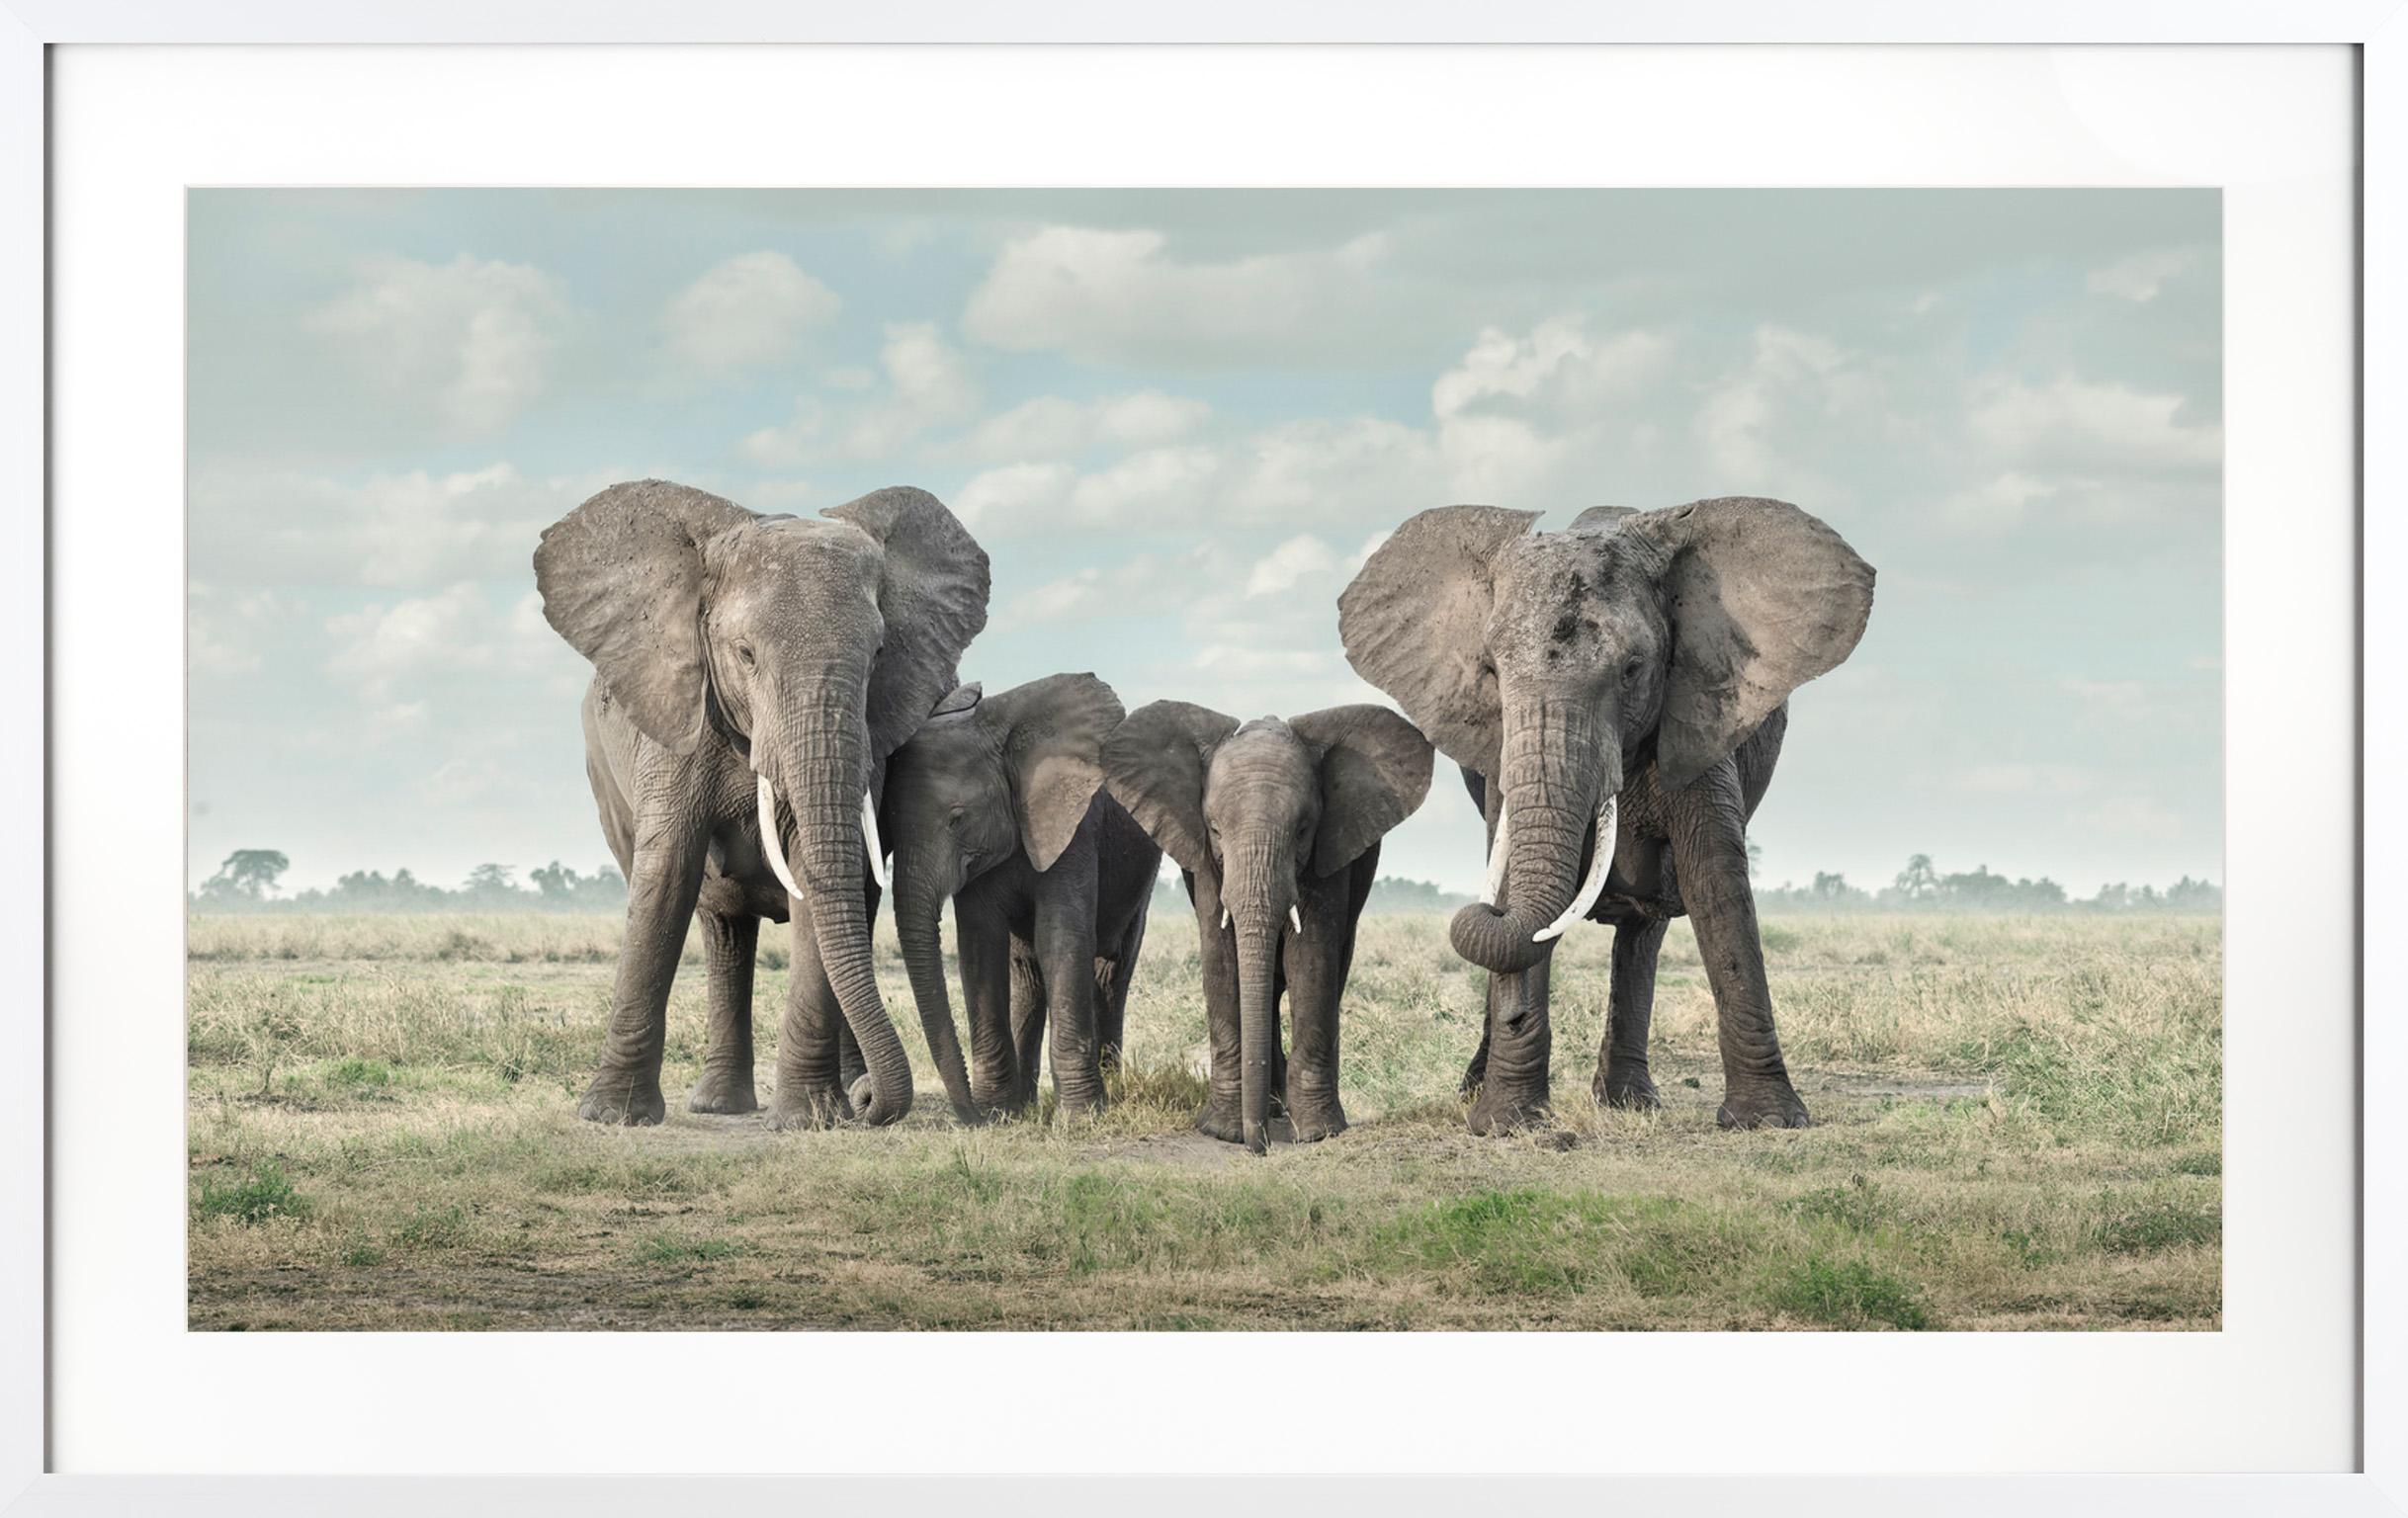 David Burdeny Color Photograph - "Solice, Amboseli, Kenya" Contemporary African Elephant Family Framed Photograph